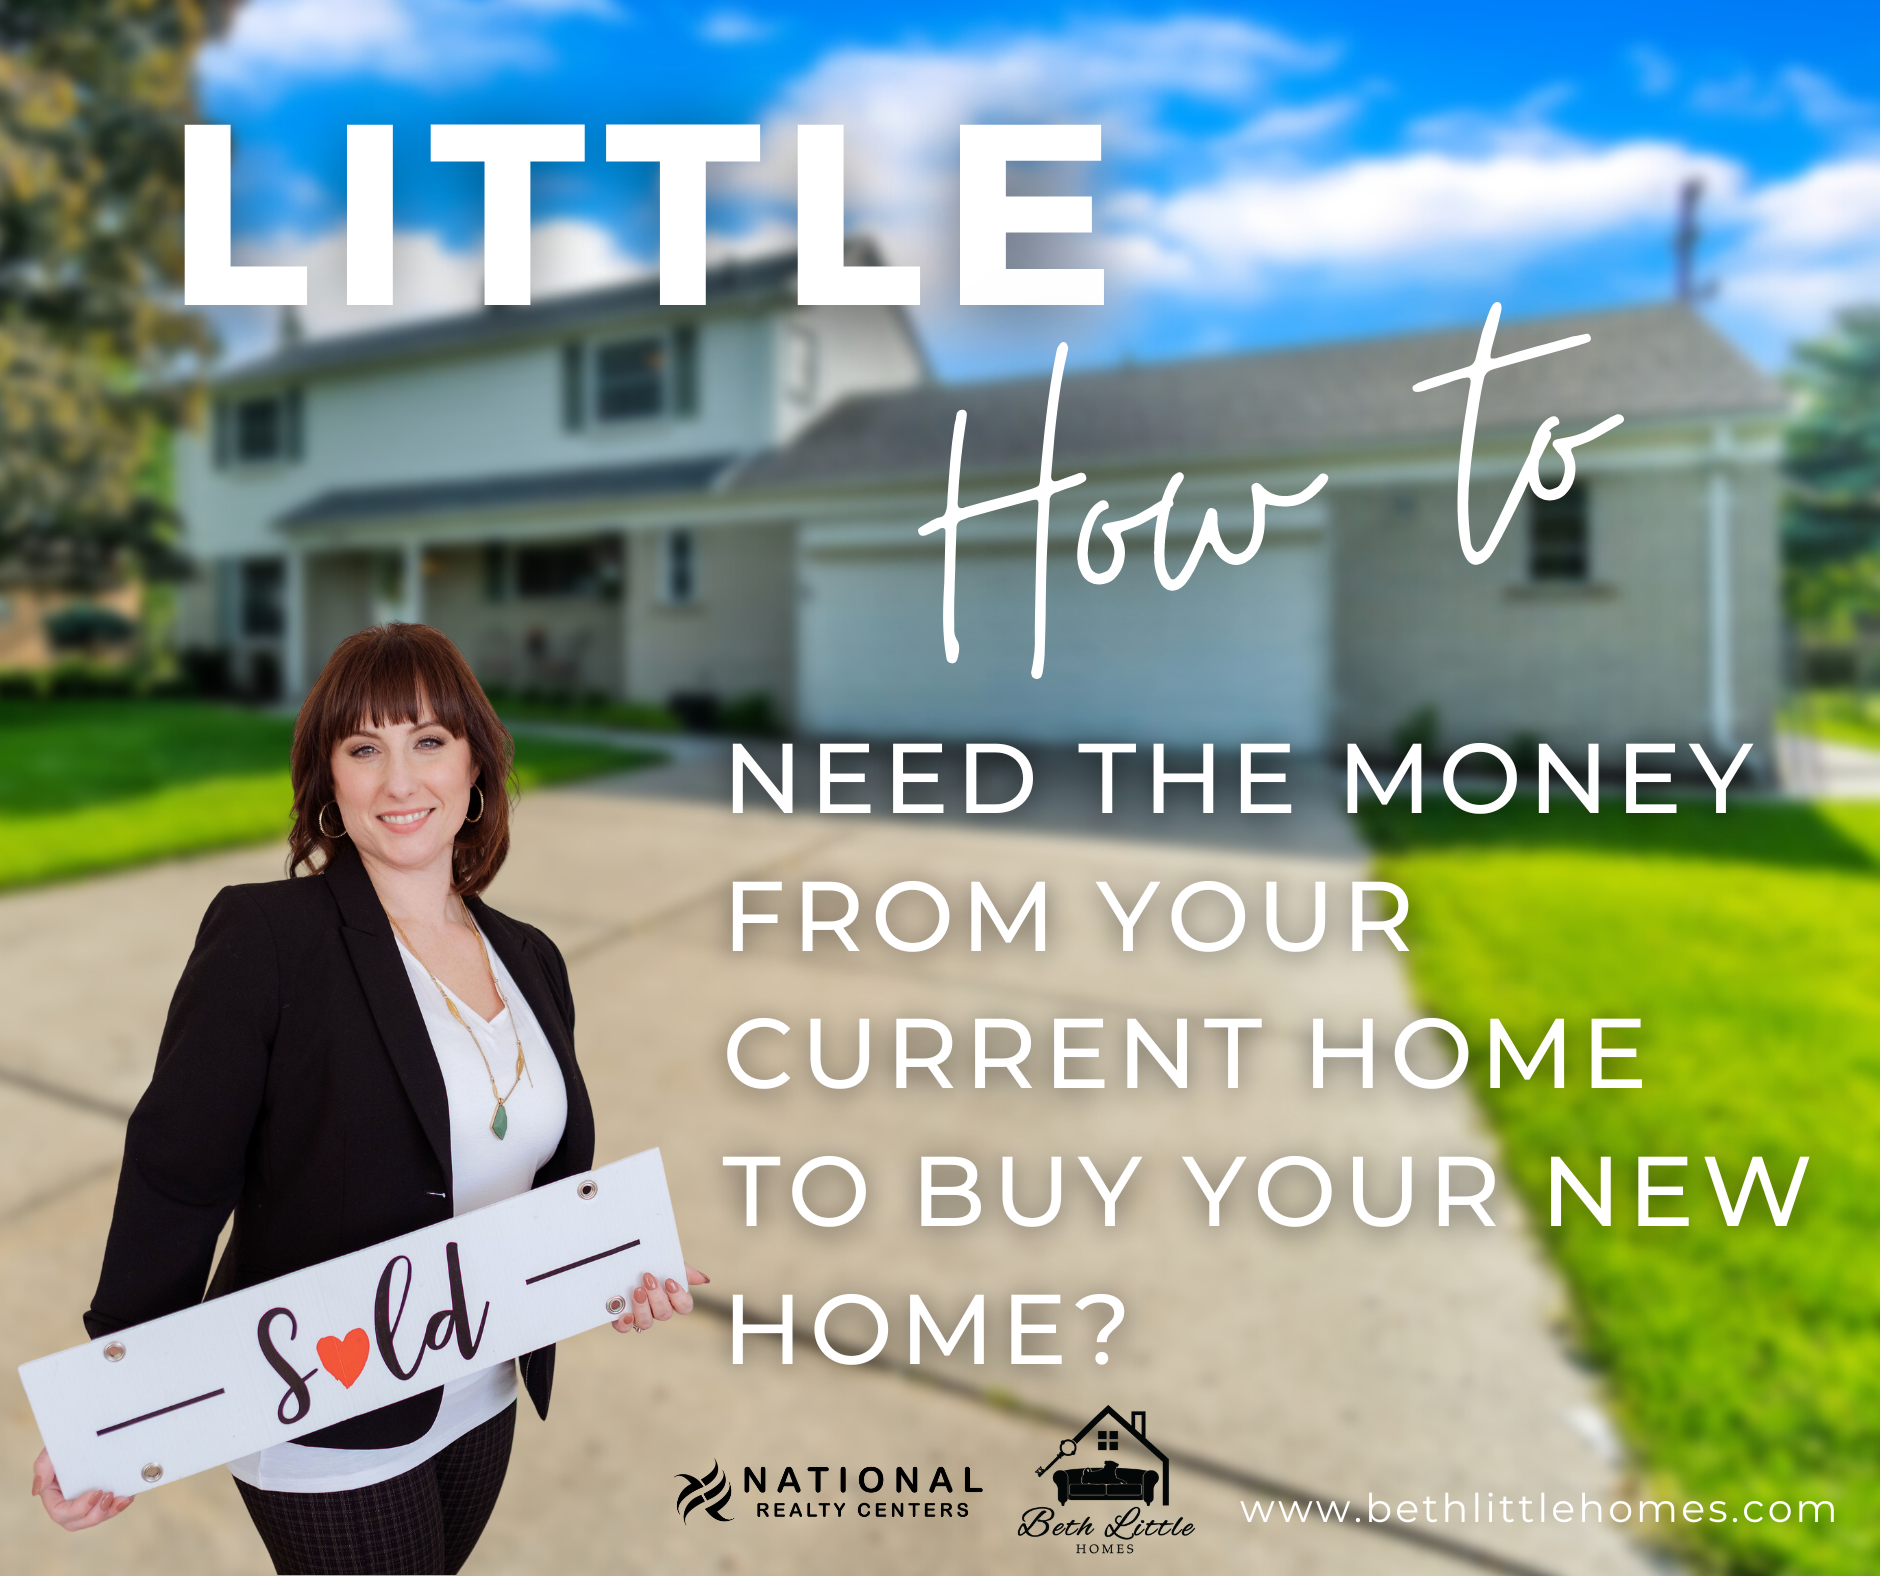 Need the money from your current home to buy your new home?